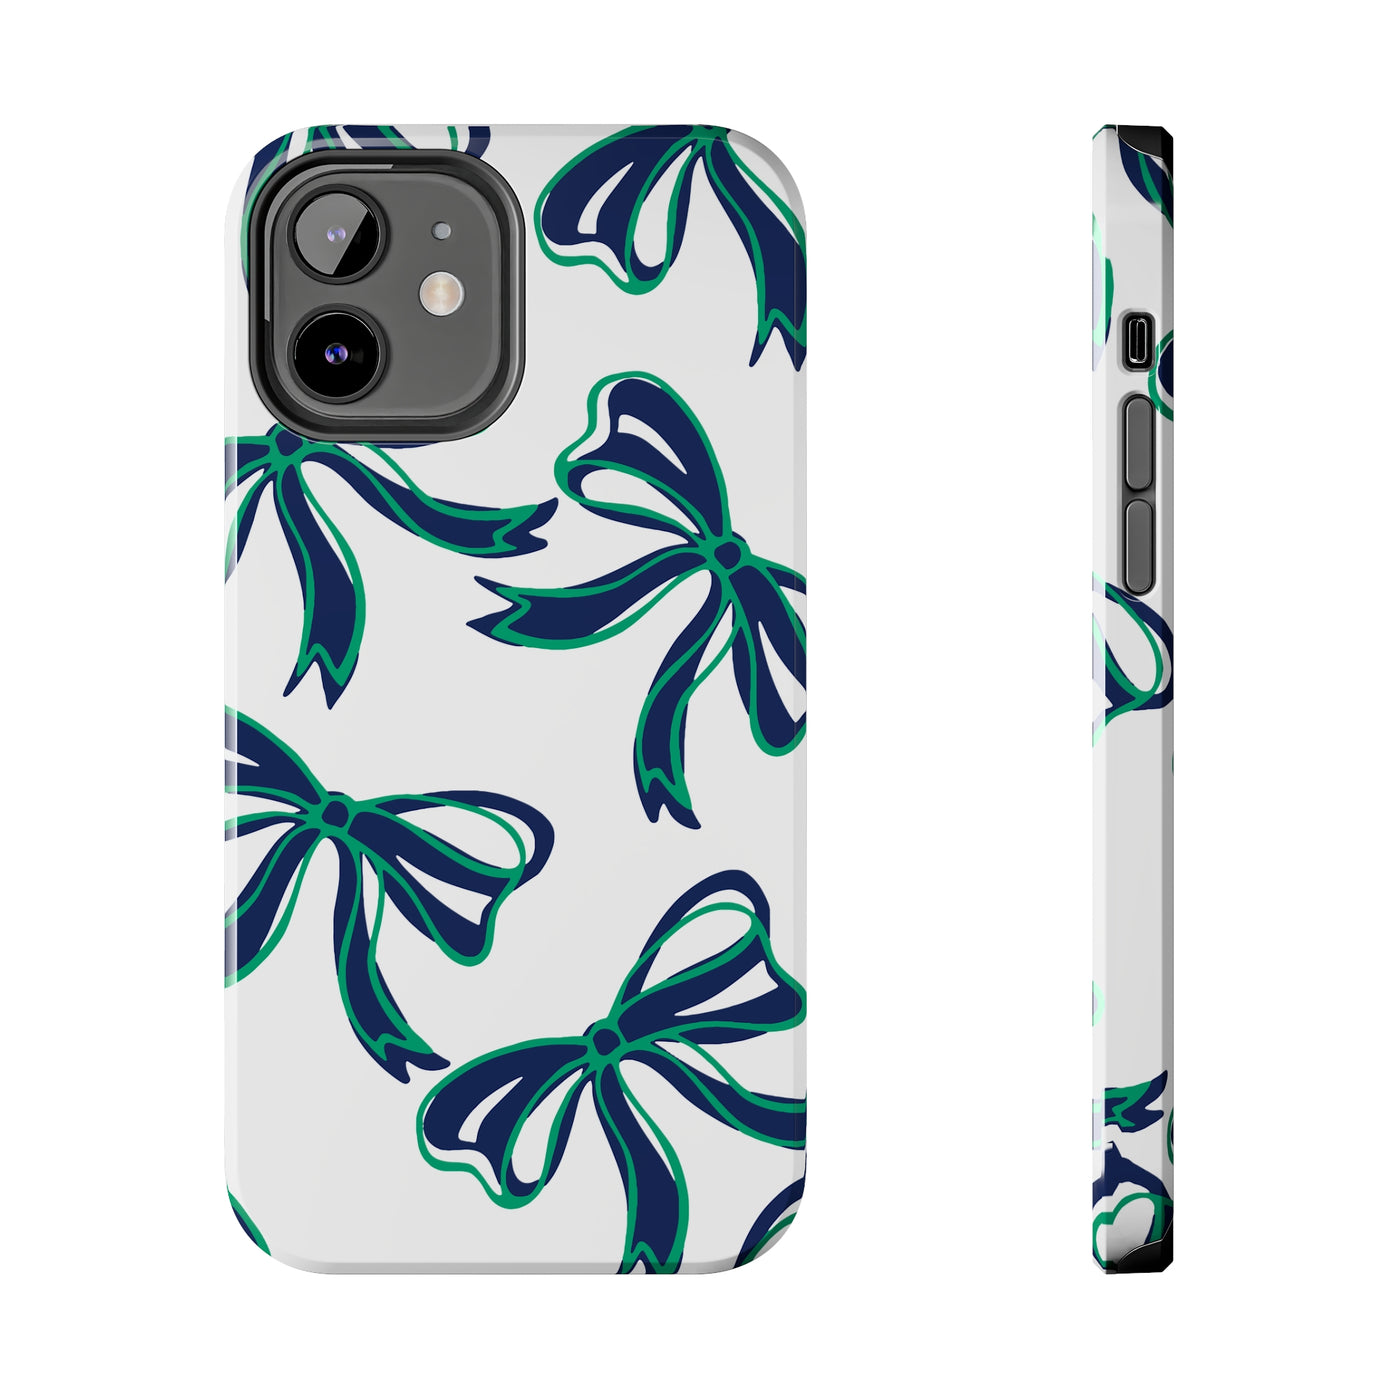 Trendy Bow Phone Case, Bed Party Bow Iphone case, Bow Phone Case, - Notre Dame, green and blue